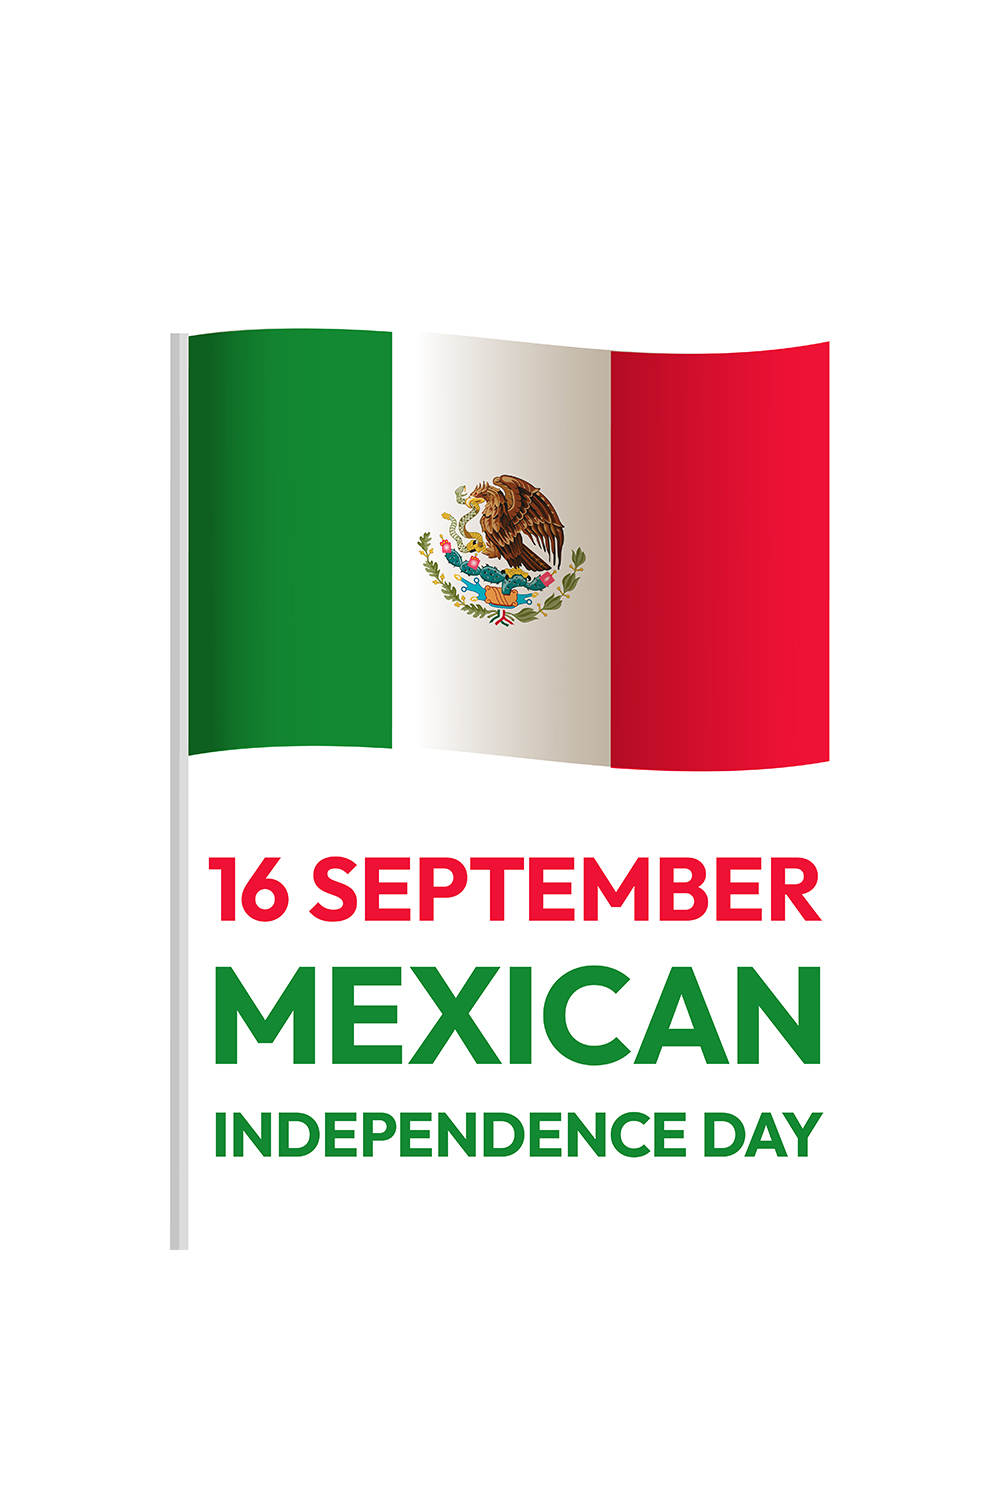 Mexico independence day pinterest preview image.